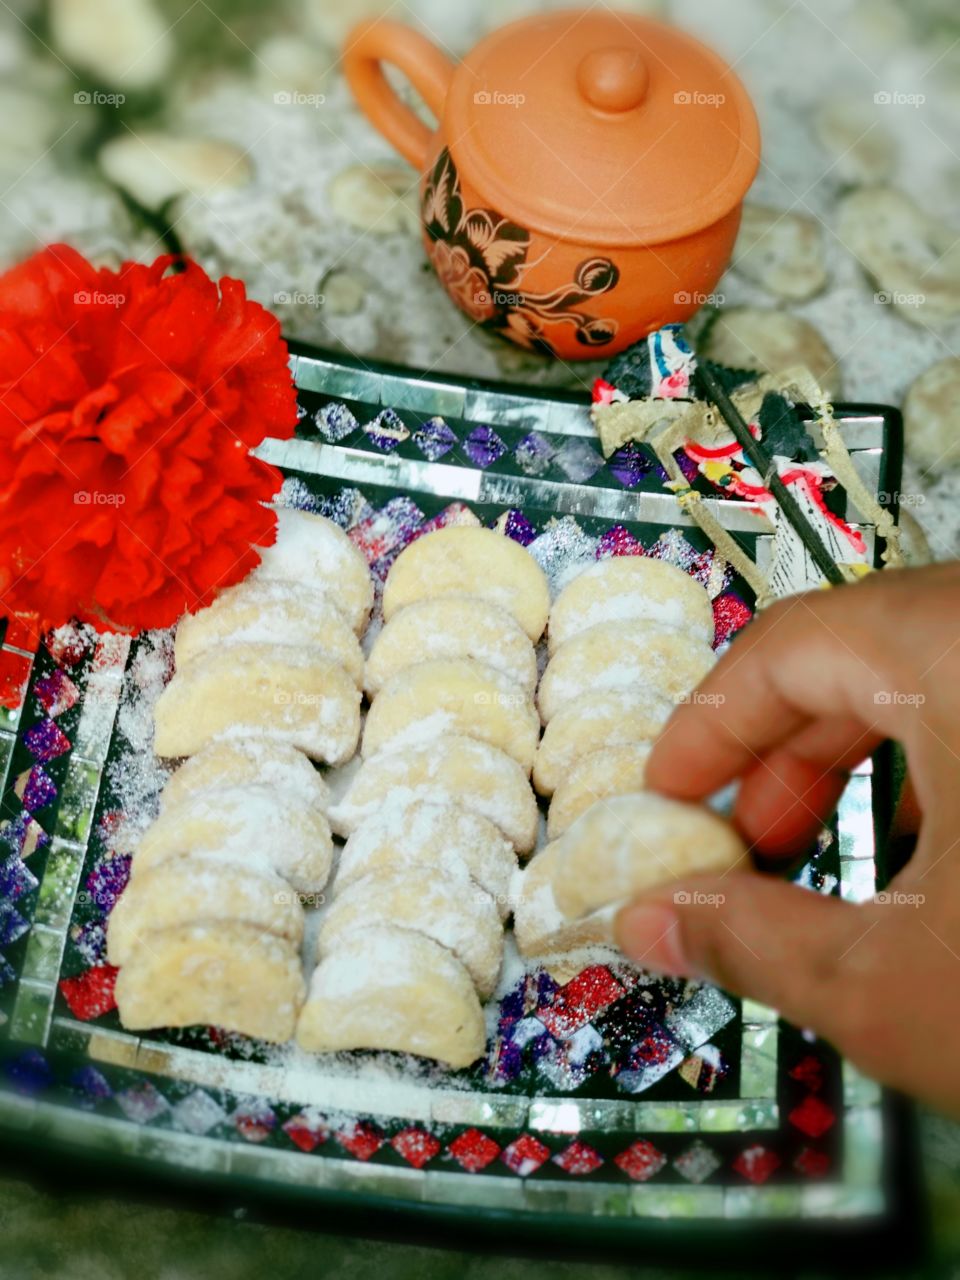 snow cookies Indonesia traditional